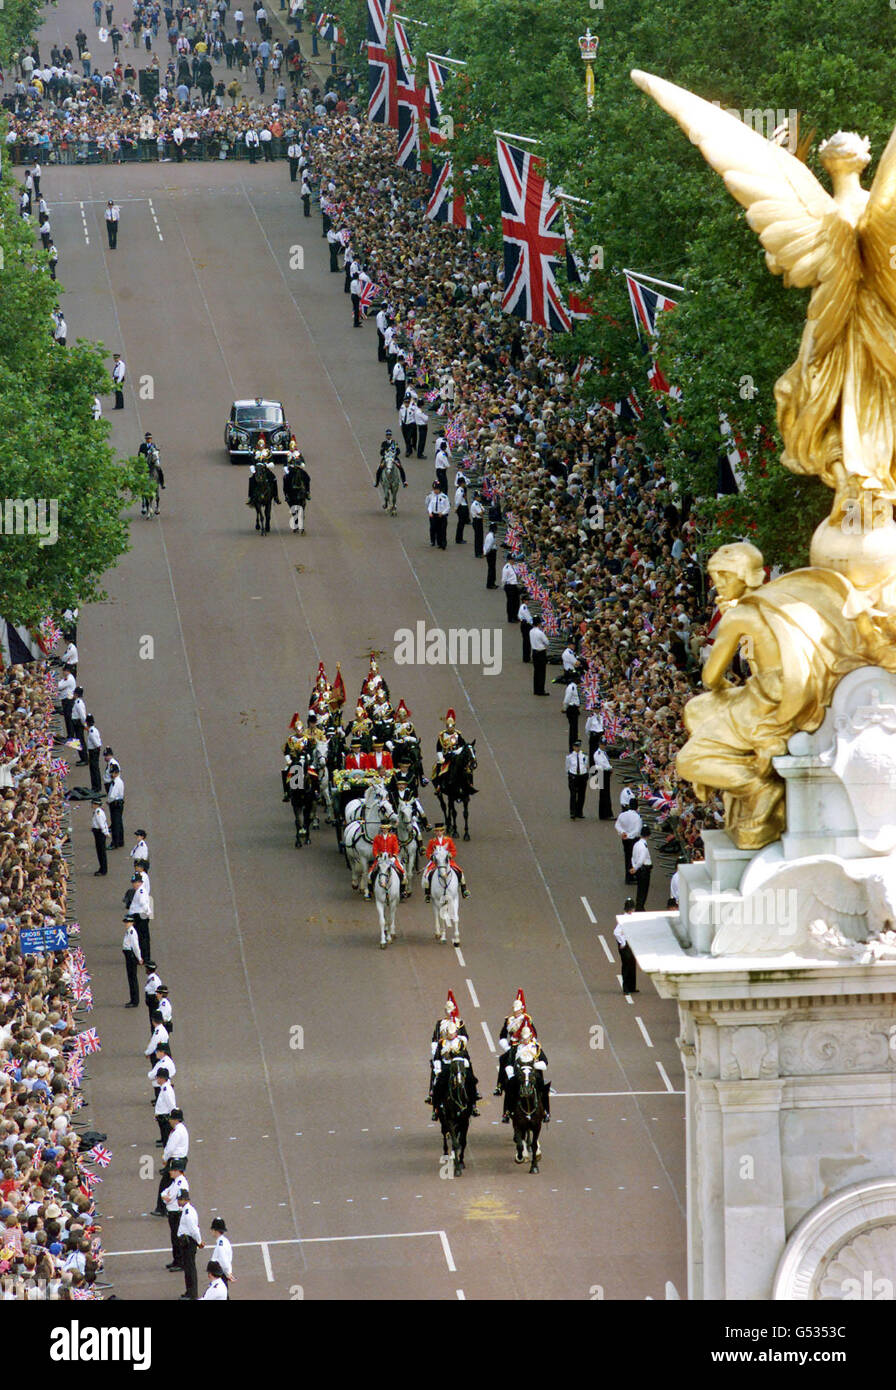 Queen Elizabeth The Queen Mother and Prince Charles drive down The Mall towards Buckingham Palace during her birthday celebrations. The Queen Mother turned 100 and travelled by horse-drawn carriage from Clarence House, her London residence *... along the Mall to Buckingham Palace. Stock Photo